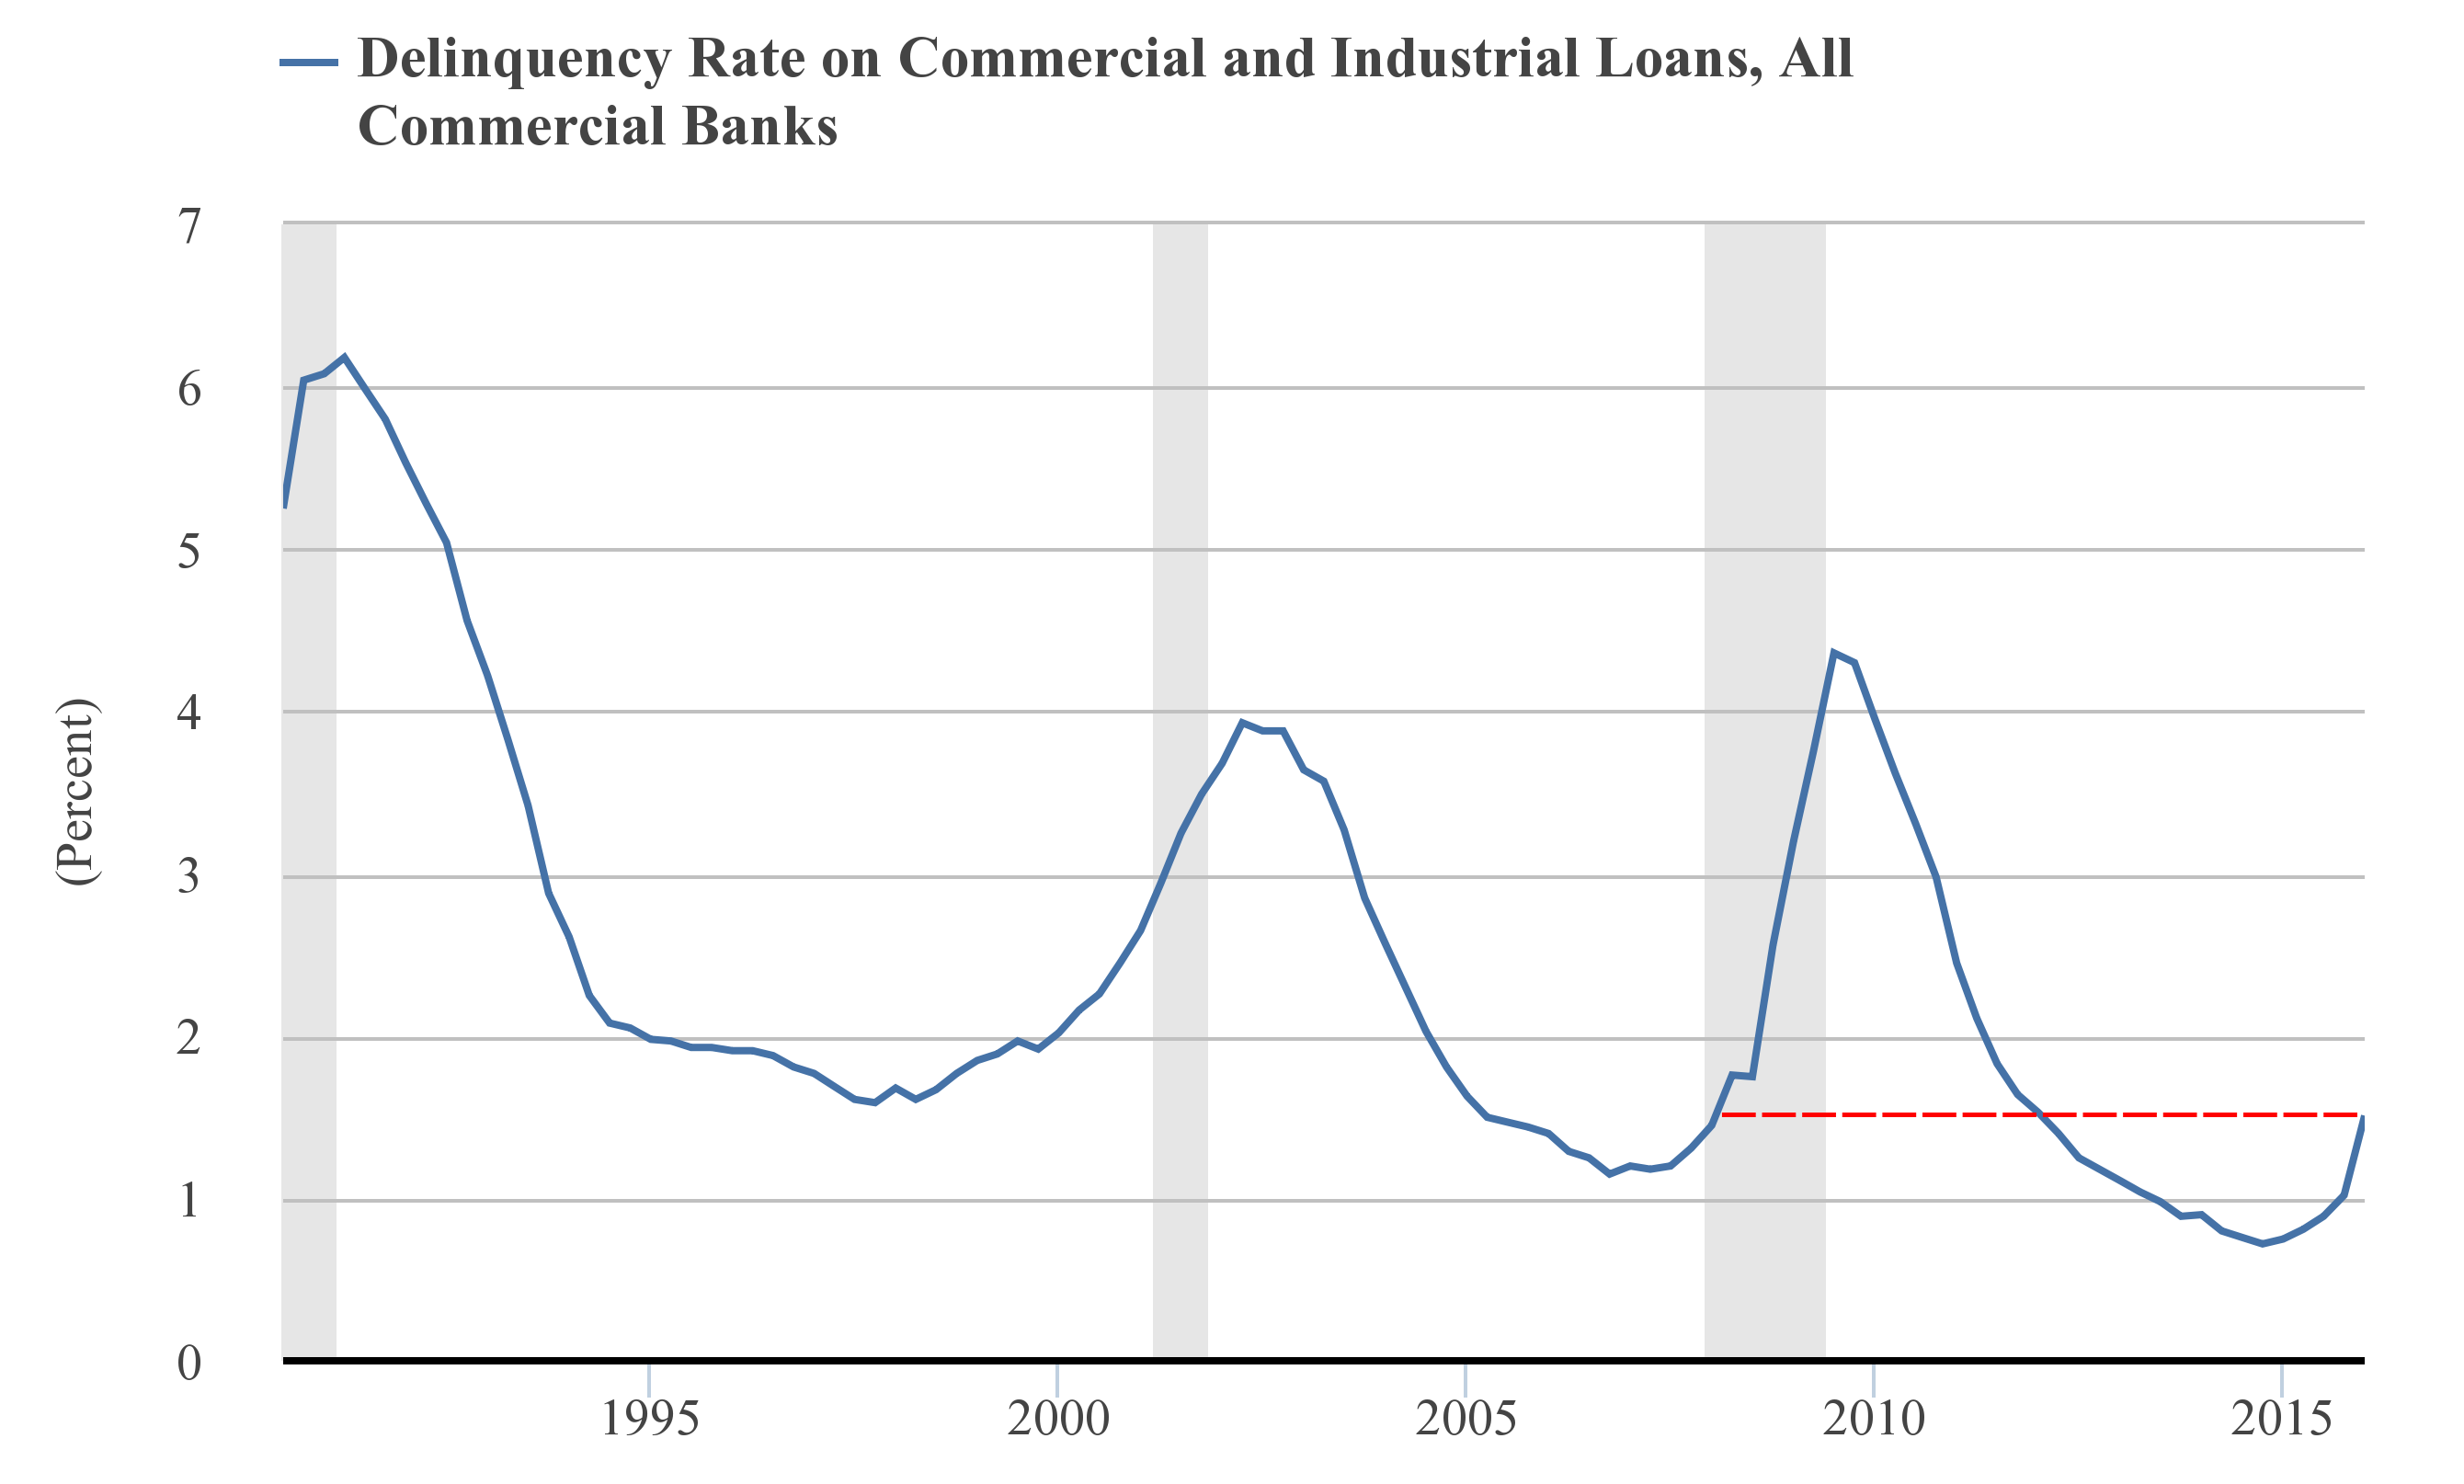 Delinquency rate on bank loans is skyrocketing in the US